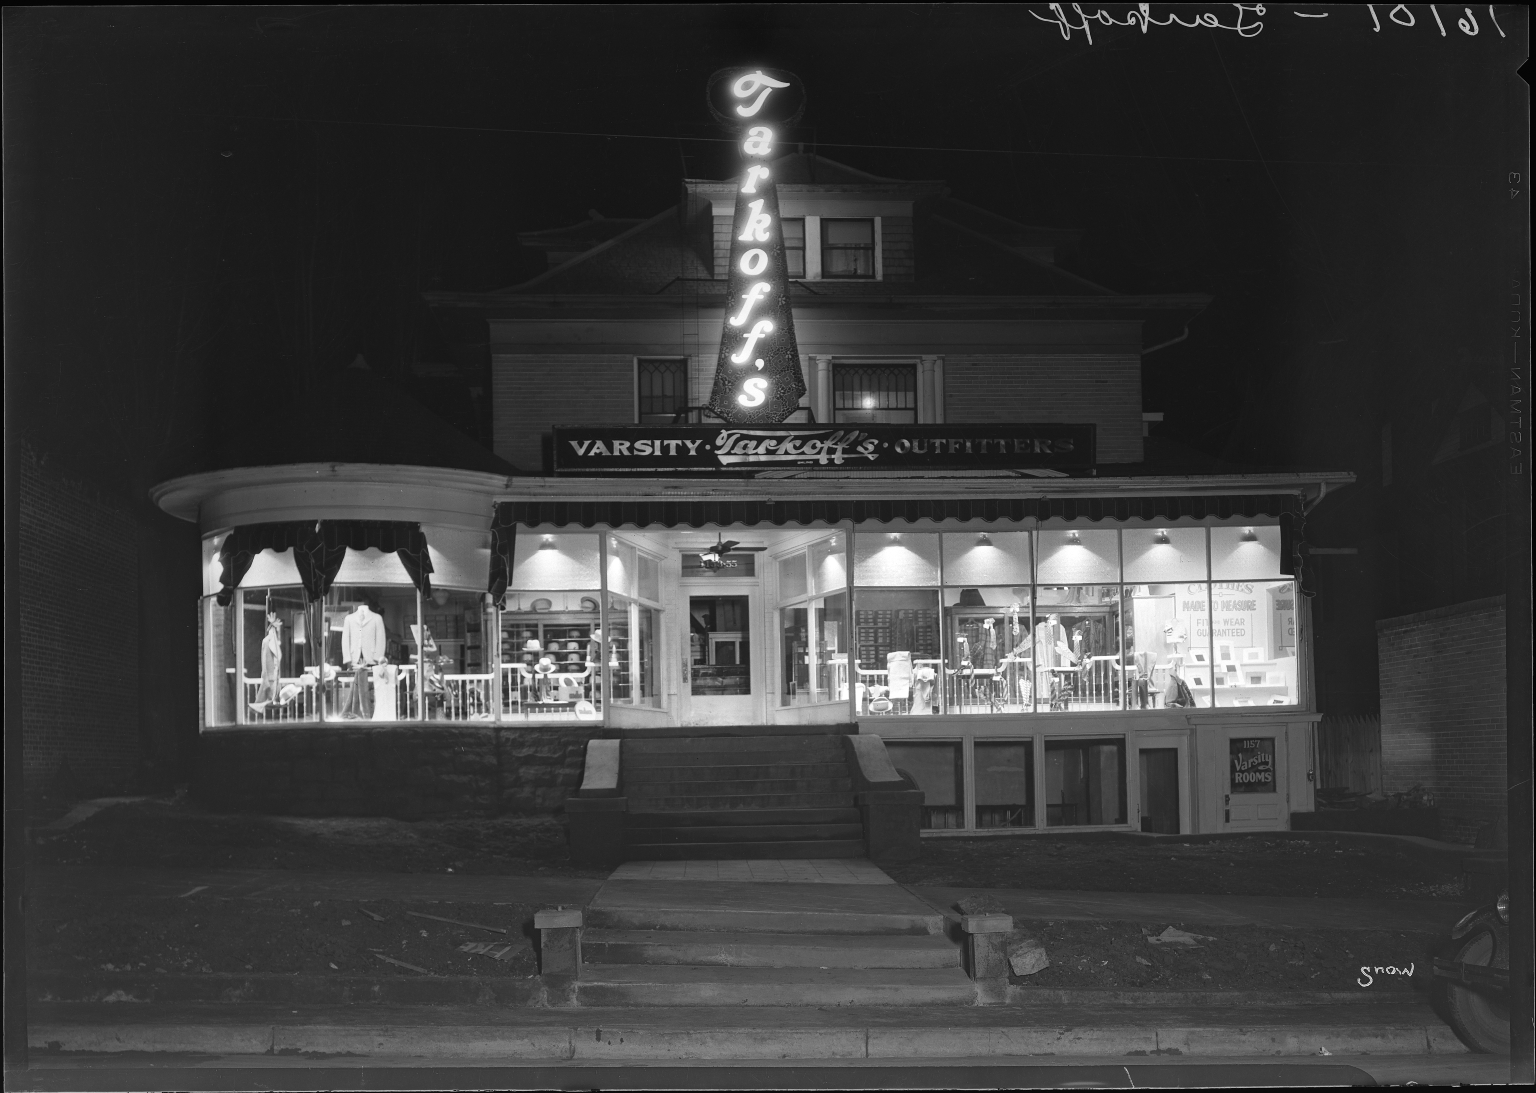 Tarkoff's Varsity Outfitters storefront during the day and night